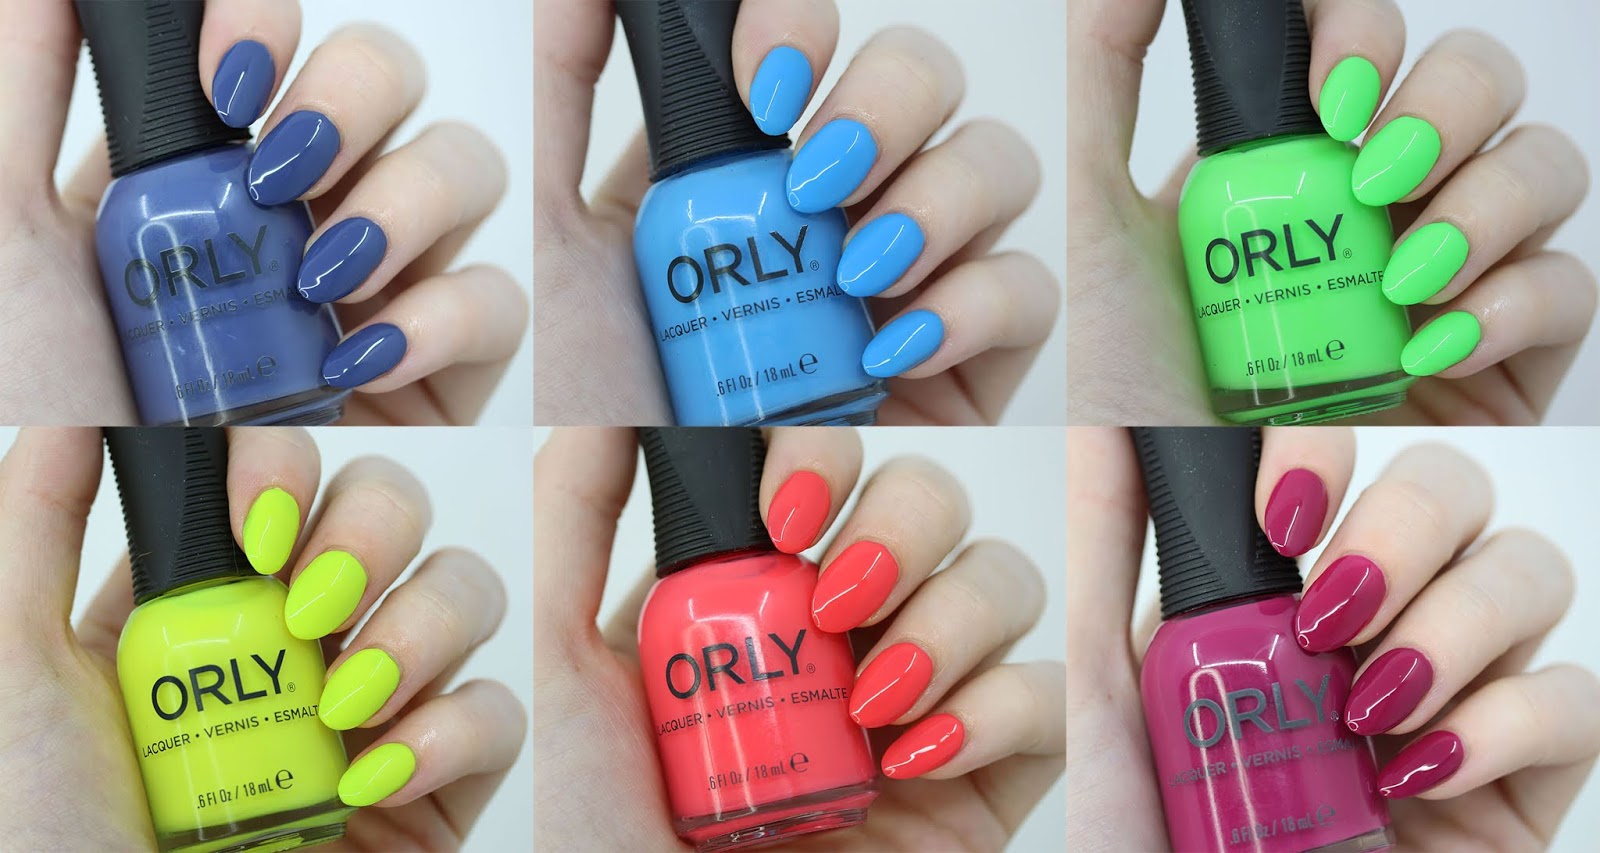 Nail Polish Canada - Orly's Summer 2022 Pop collection has arrived and it's  bright! https://www.nailpolishcanada.com/categories/orly/collections/pop-collection-summer-2022.html  Check out swatches here - https://nicolelovesnails.com/orly-pop-summer-2022  ...